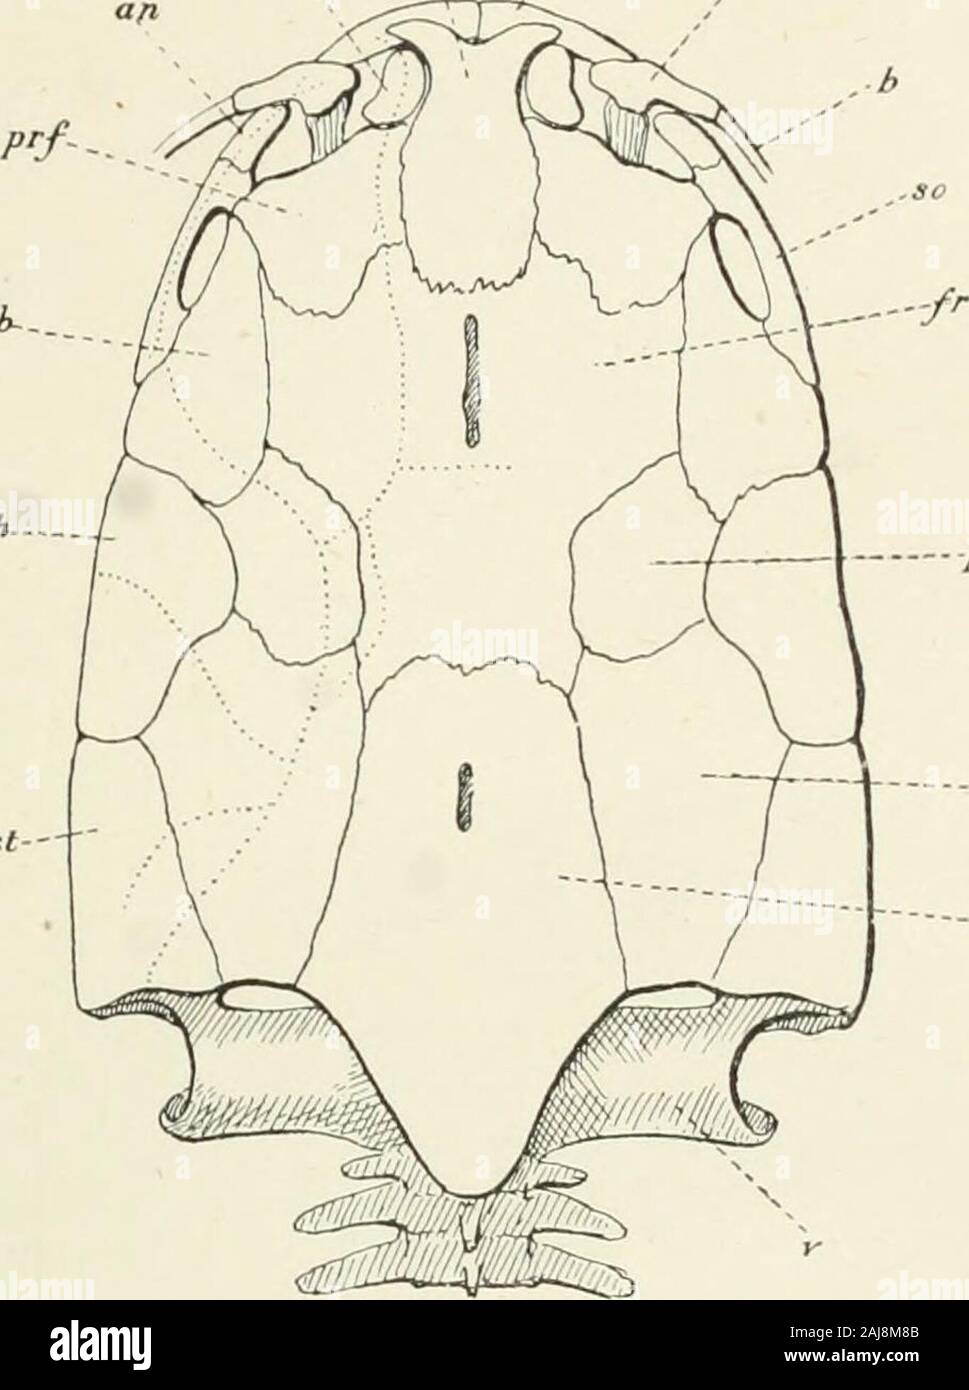 A treatise on zoology . .or2, neural arch of secondvertebra ; op, opercular ; p.f.sp, pectoral-fin spine ; pi, lateral iDony plate ; pmx, preraaxilla ;ptf, postfrontal; pst, post-temporal; pts, pterotic; r, dorsal radial; s, first dorsal spine?; soc,supraoccipital plate ; sp 2 and 3, second and third spines ; v*, fourth vertebra fixed to anterior^?ertebrae. Australia. Chiidoglanis, GtluBlgr.—Africa. Sub-Family Silurinae.and Tertiary. Saccohranchxis.Pseudeutropiu!^, Bl. ; Asia, andCuv.—Africi. Eumeda, Cost. Sub-Family Bagrinae.Pliocene. Ariui^, C. and V.;Asia, America ; Miocene, NN. America. JJ Stock Photo